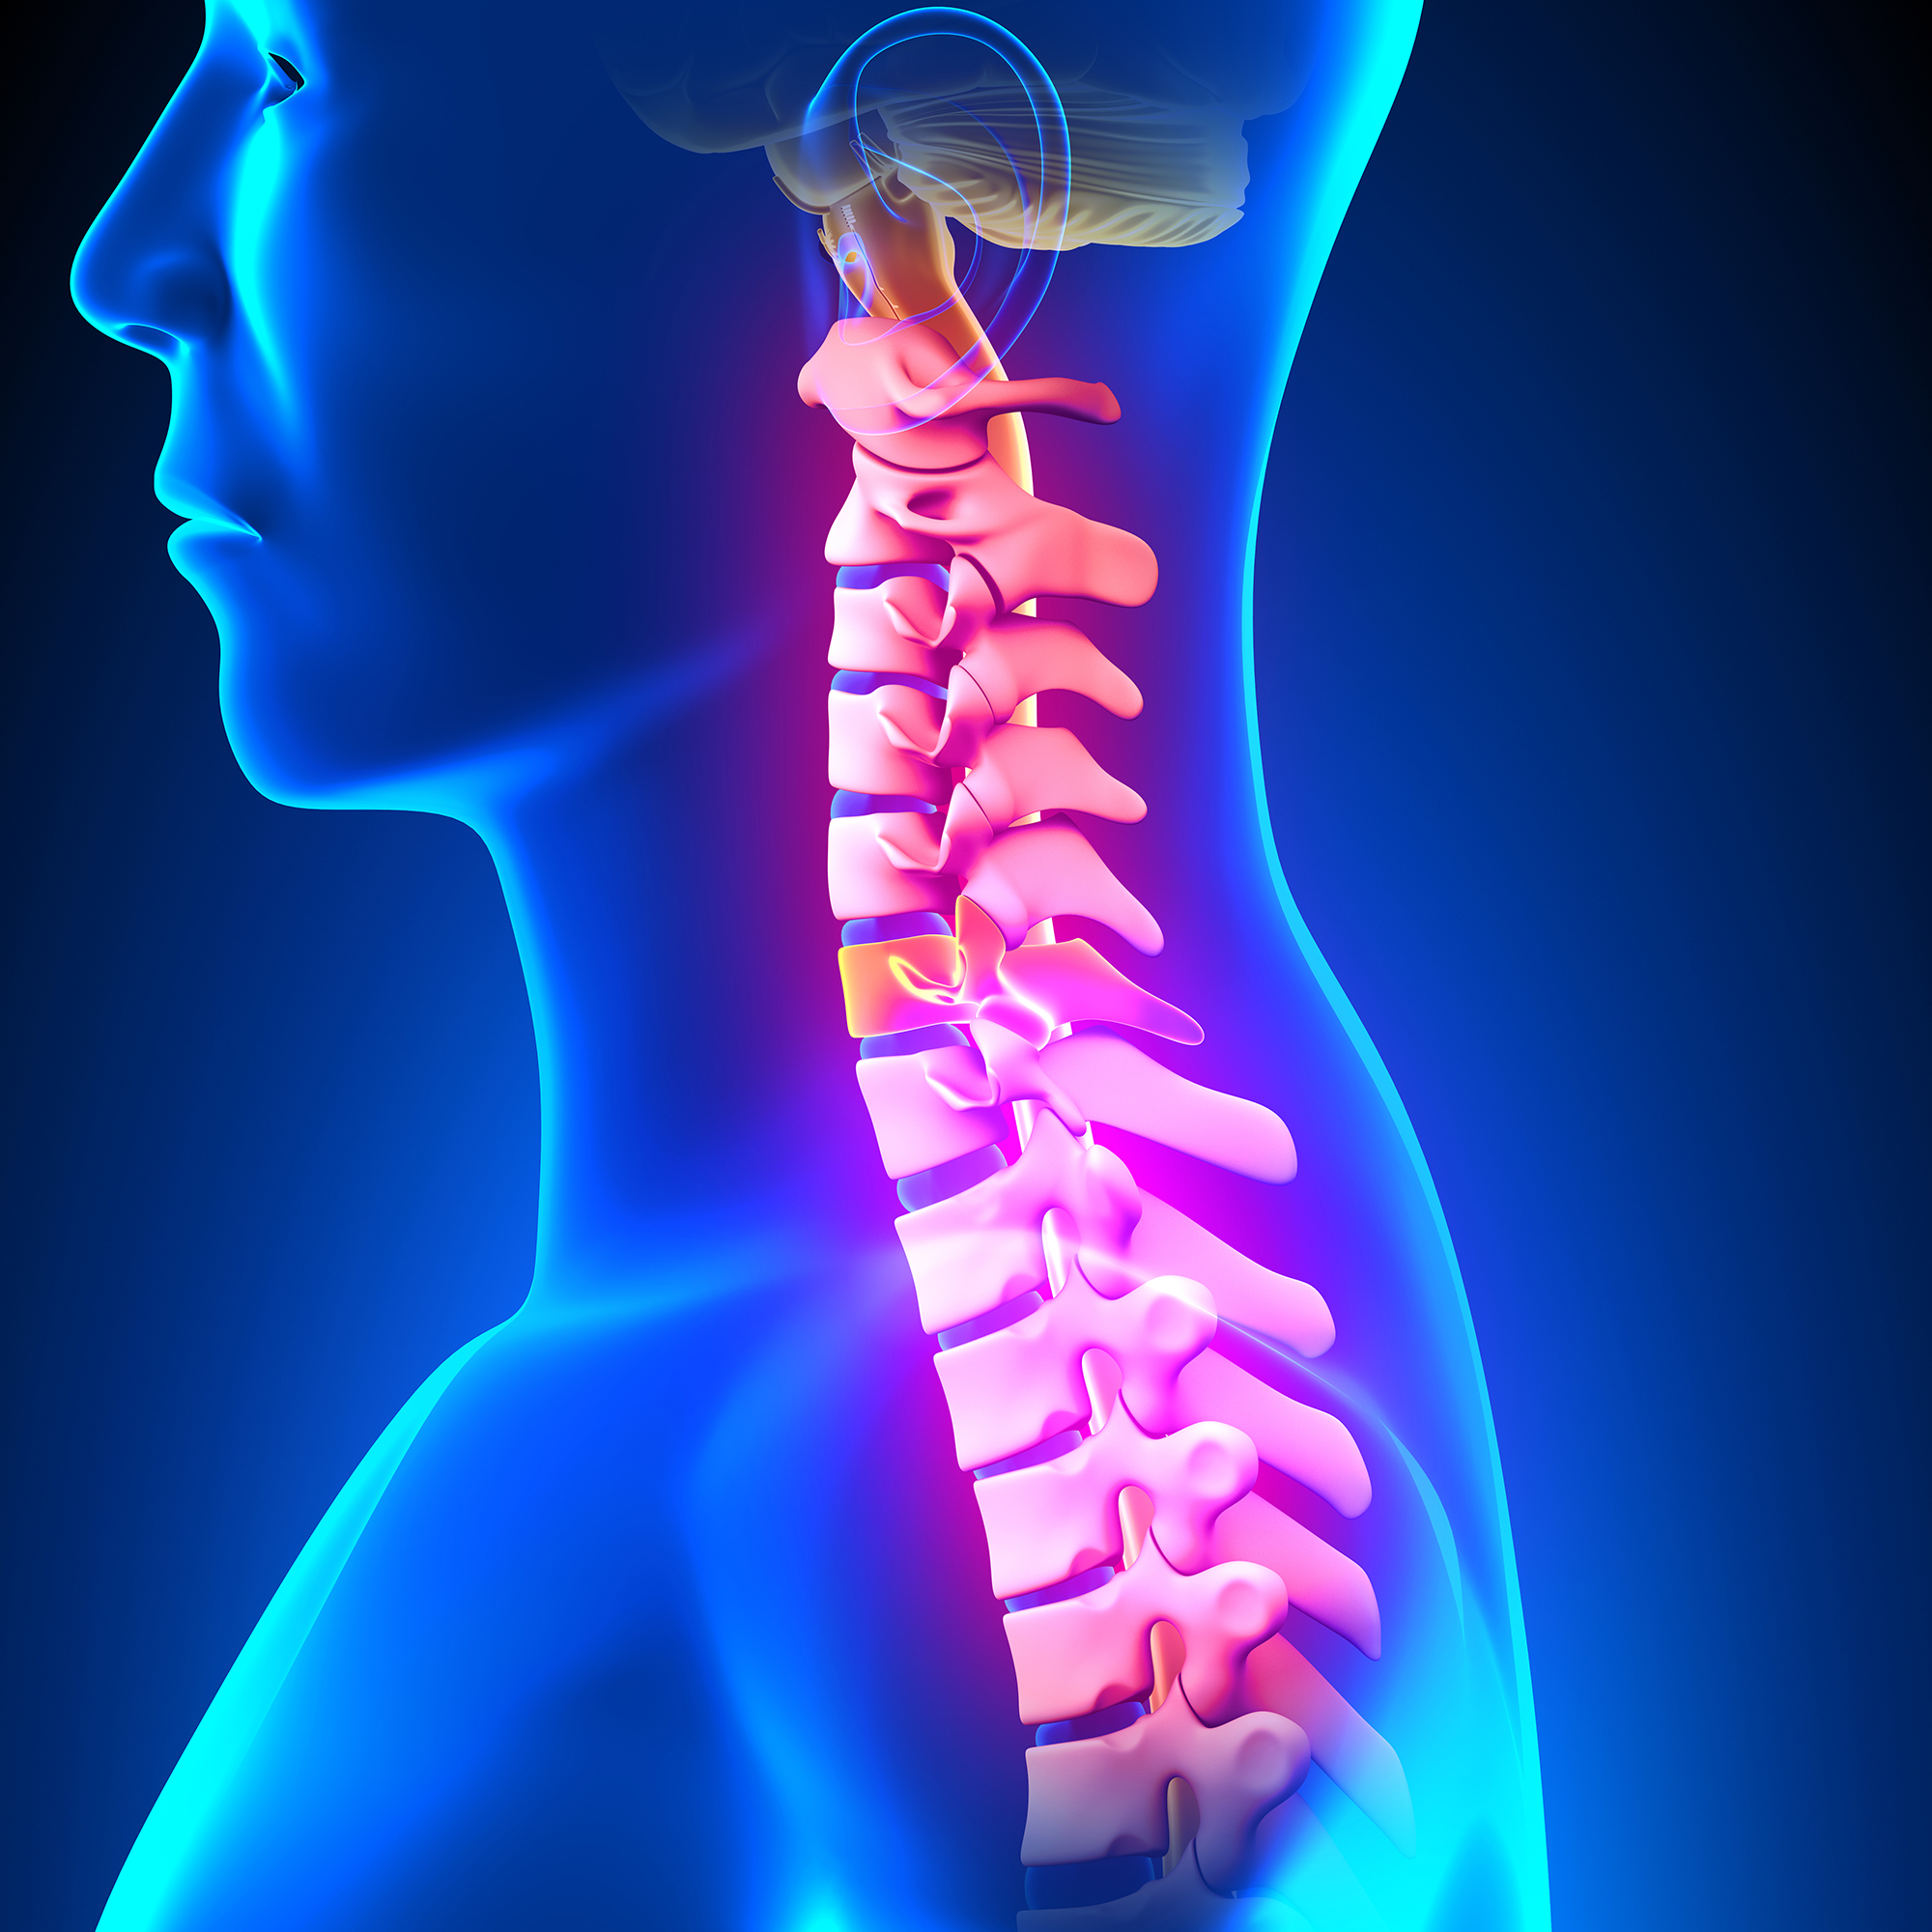 Neck Pain caused by Auto Accident